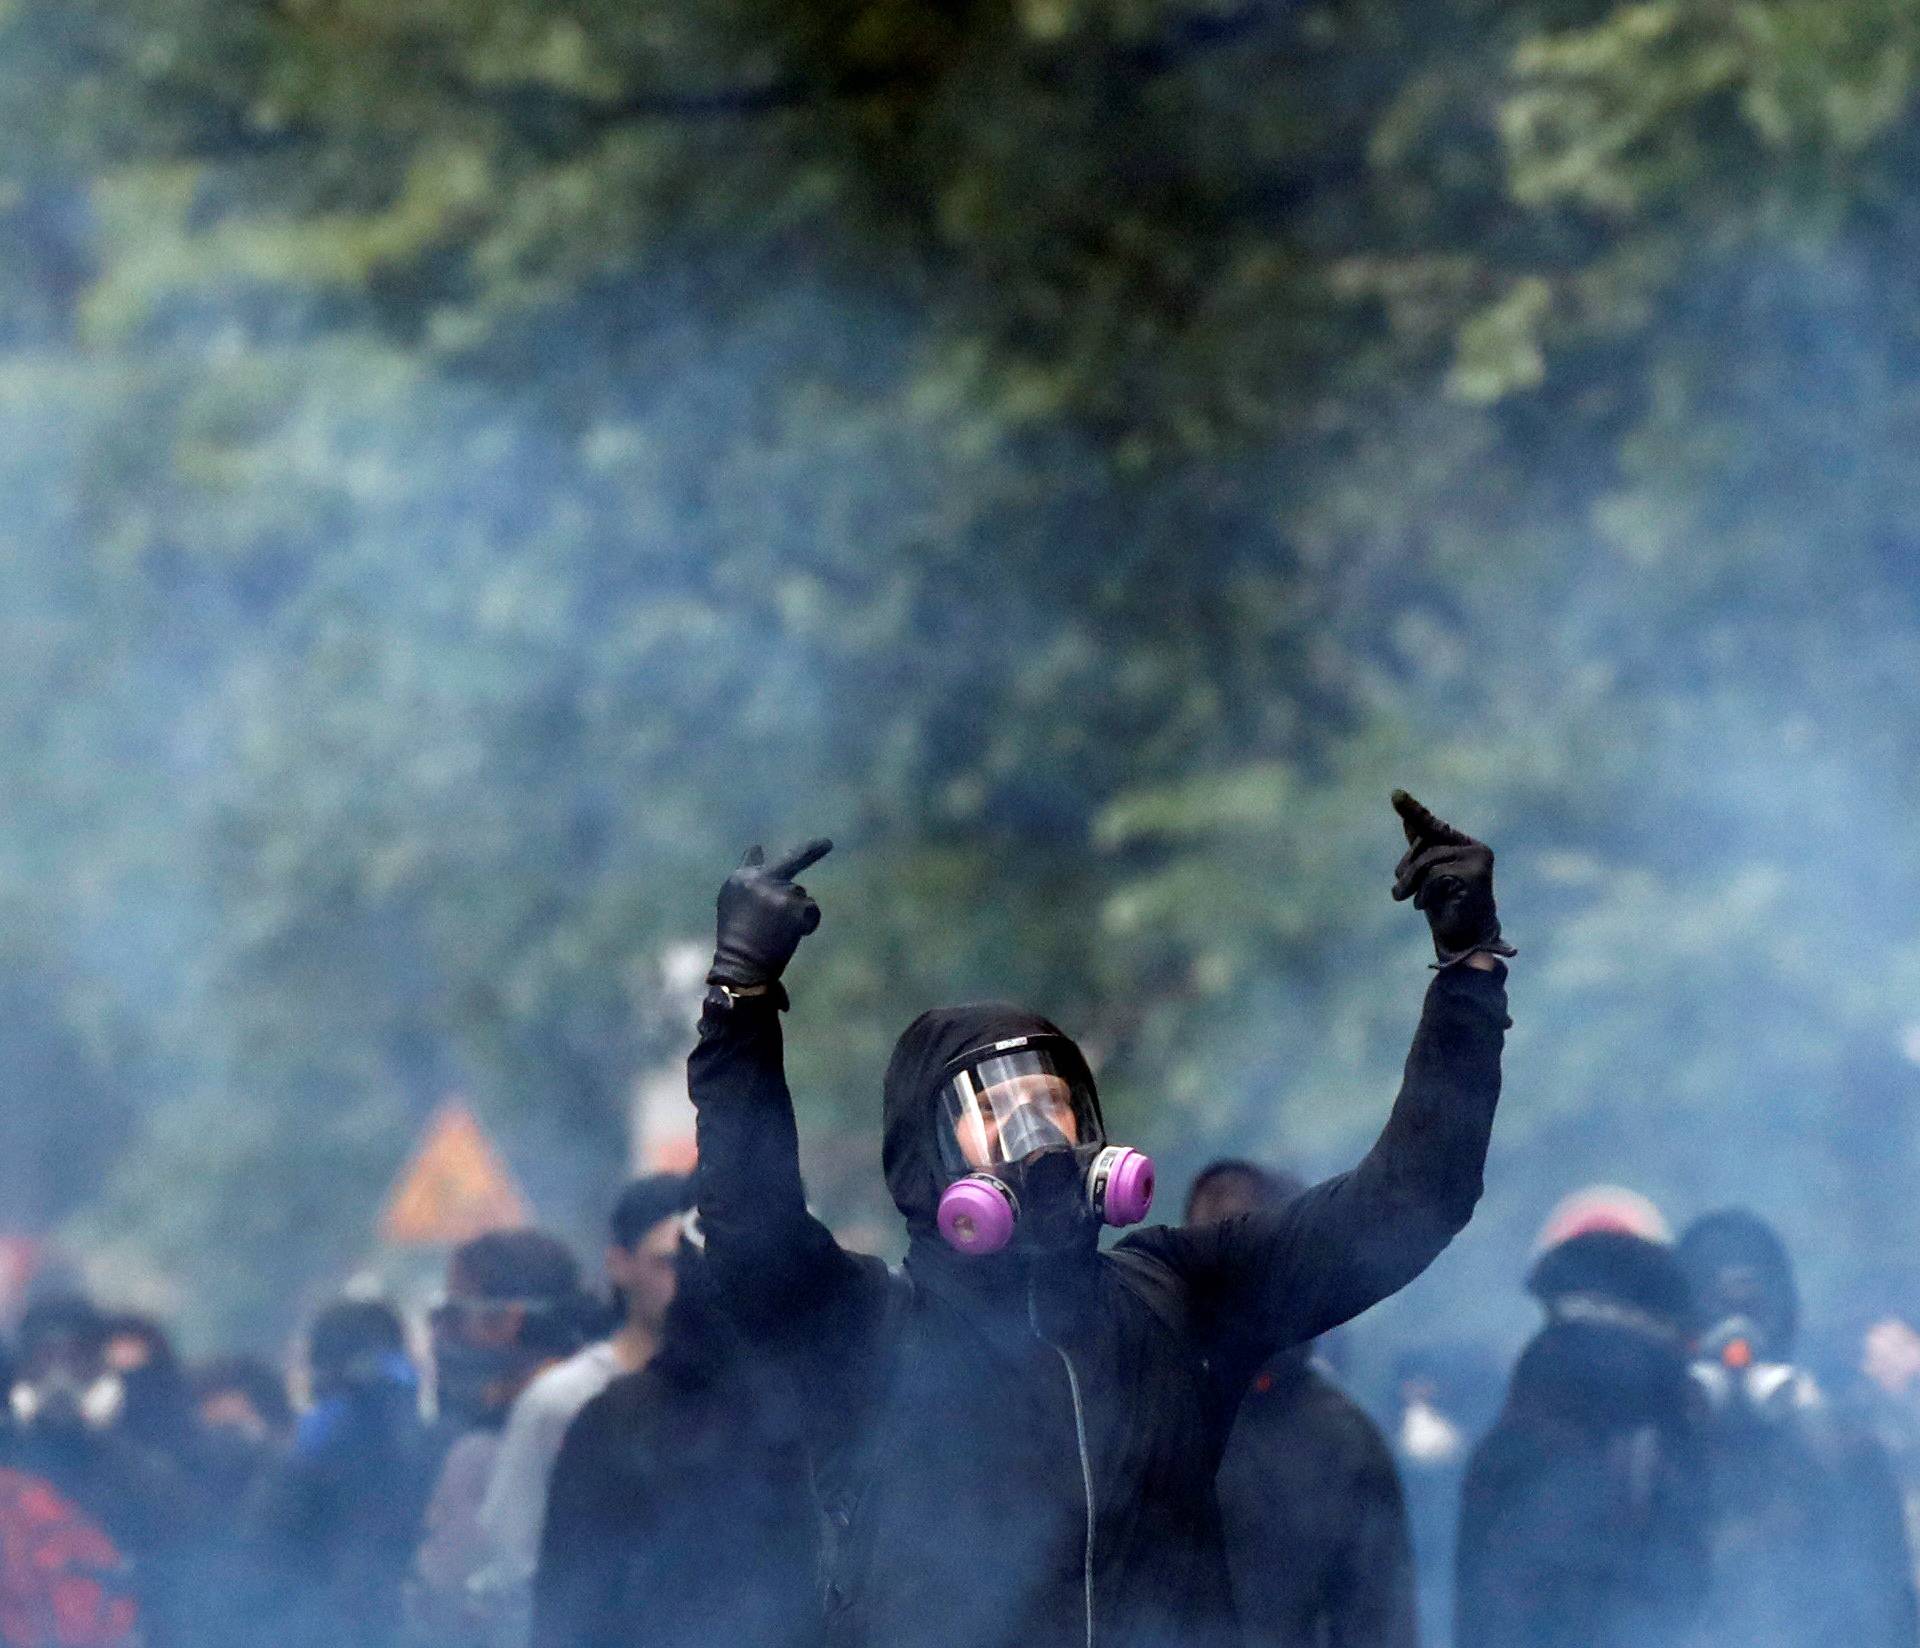 Tear gas floats in the air as a masked protester reacts during clashes with French riot police at the May Day labour union rally in Paris